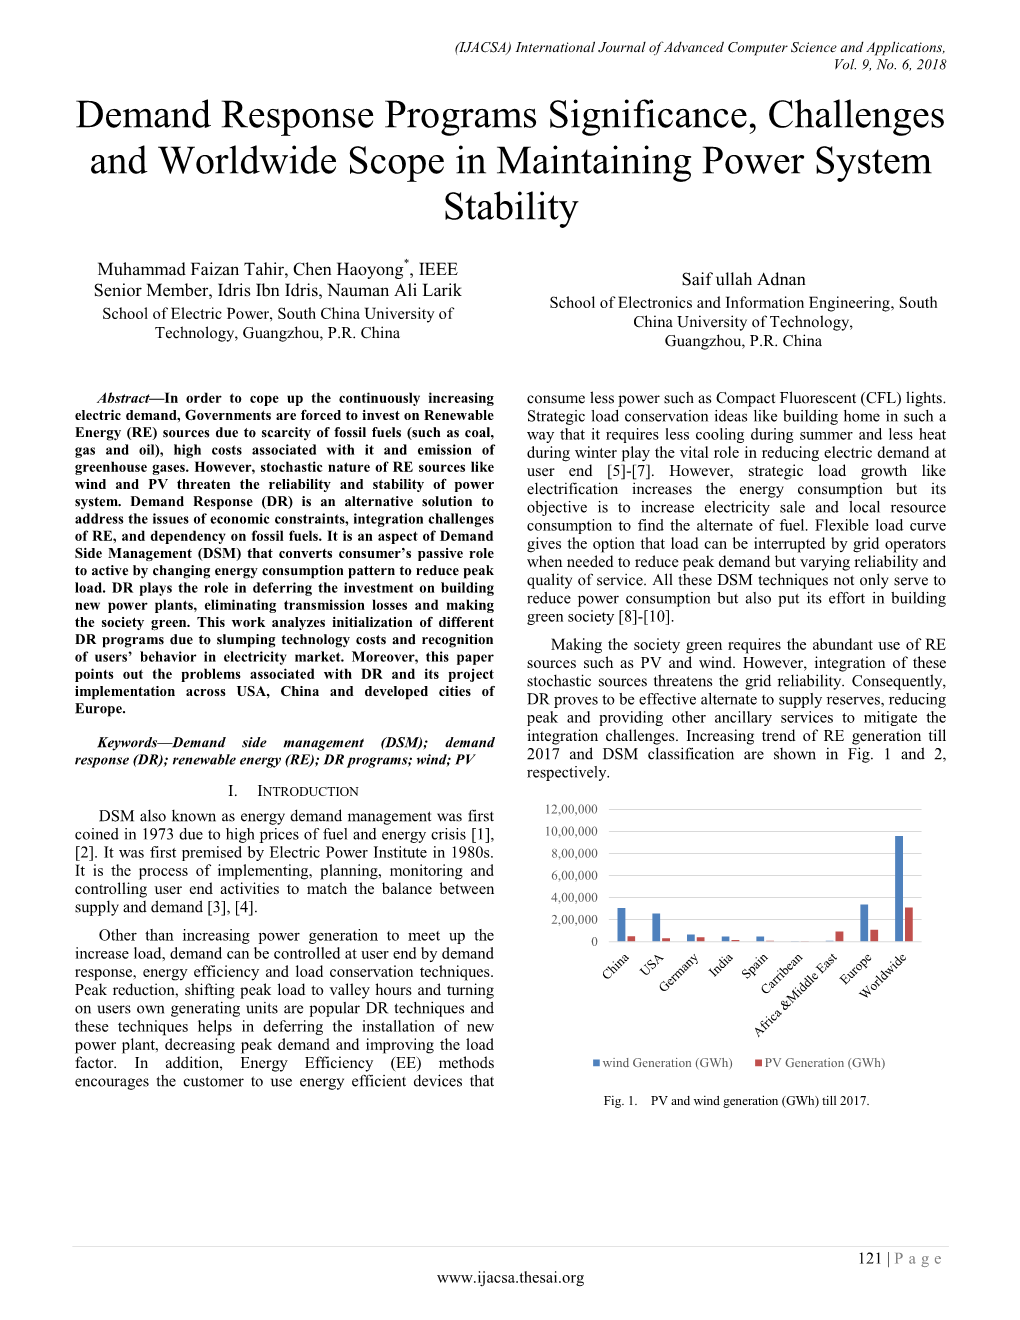 Demand Response Programs Significance, Challenges and Worldwide Scope in Maintaining Power System Stability